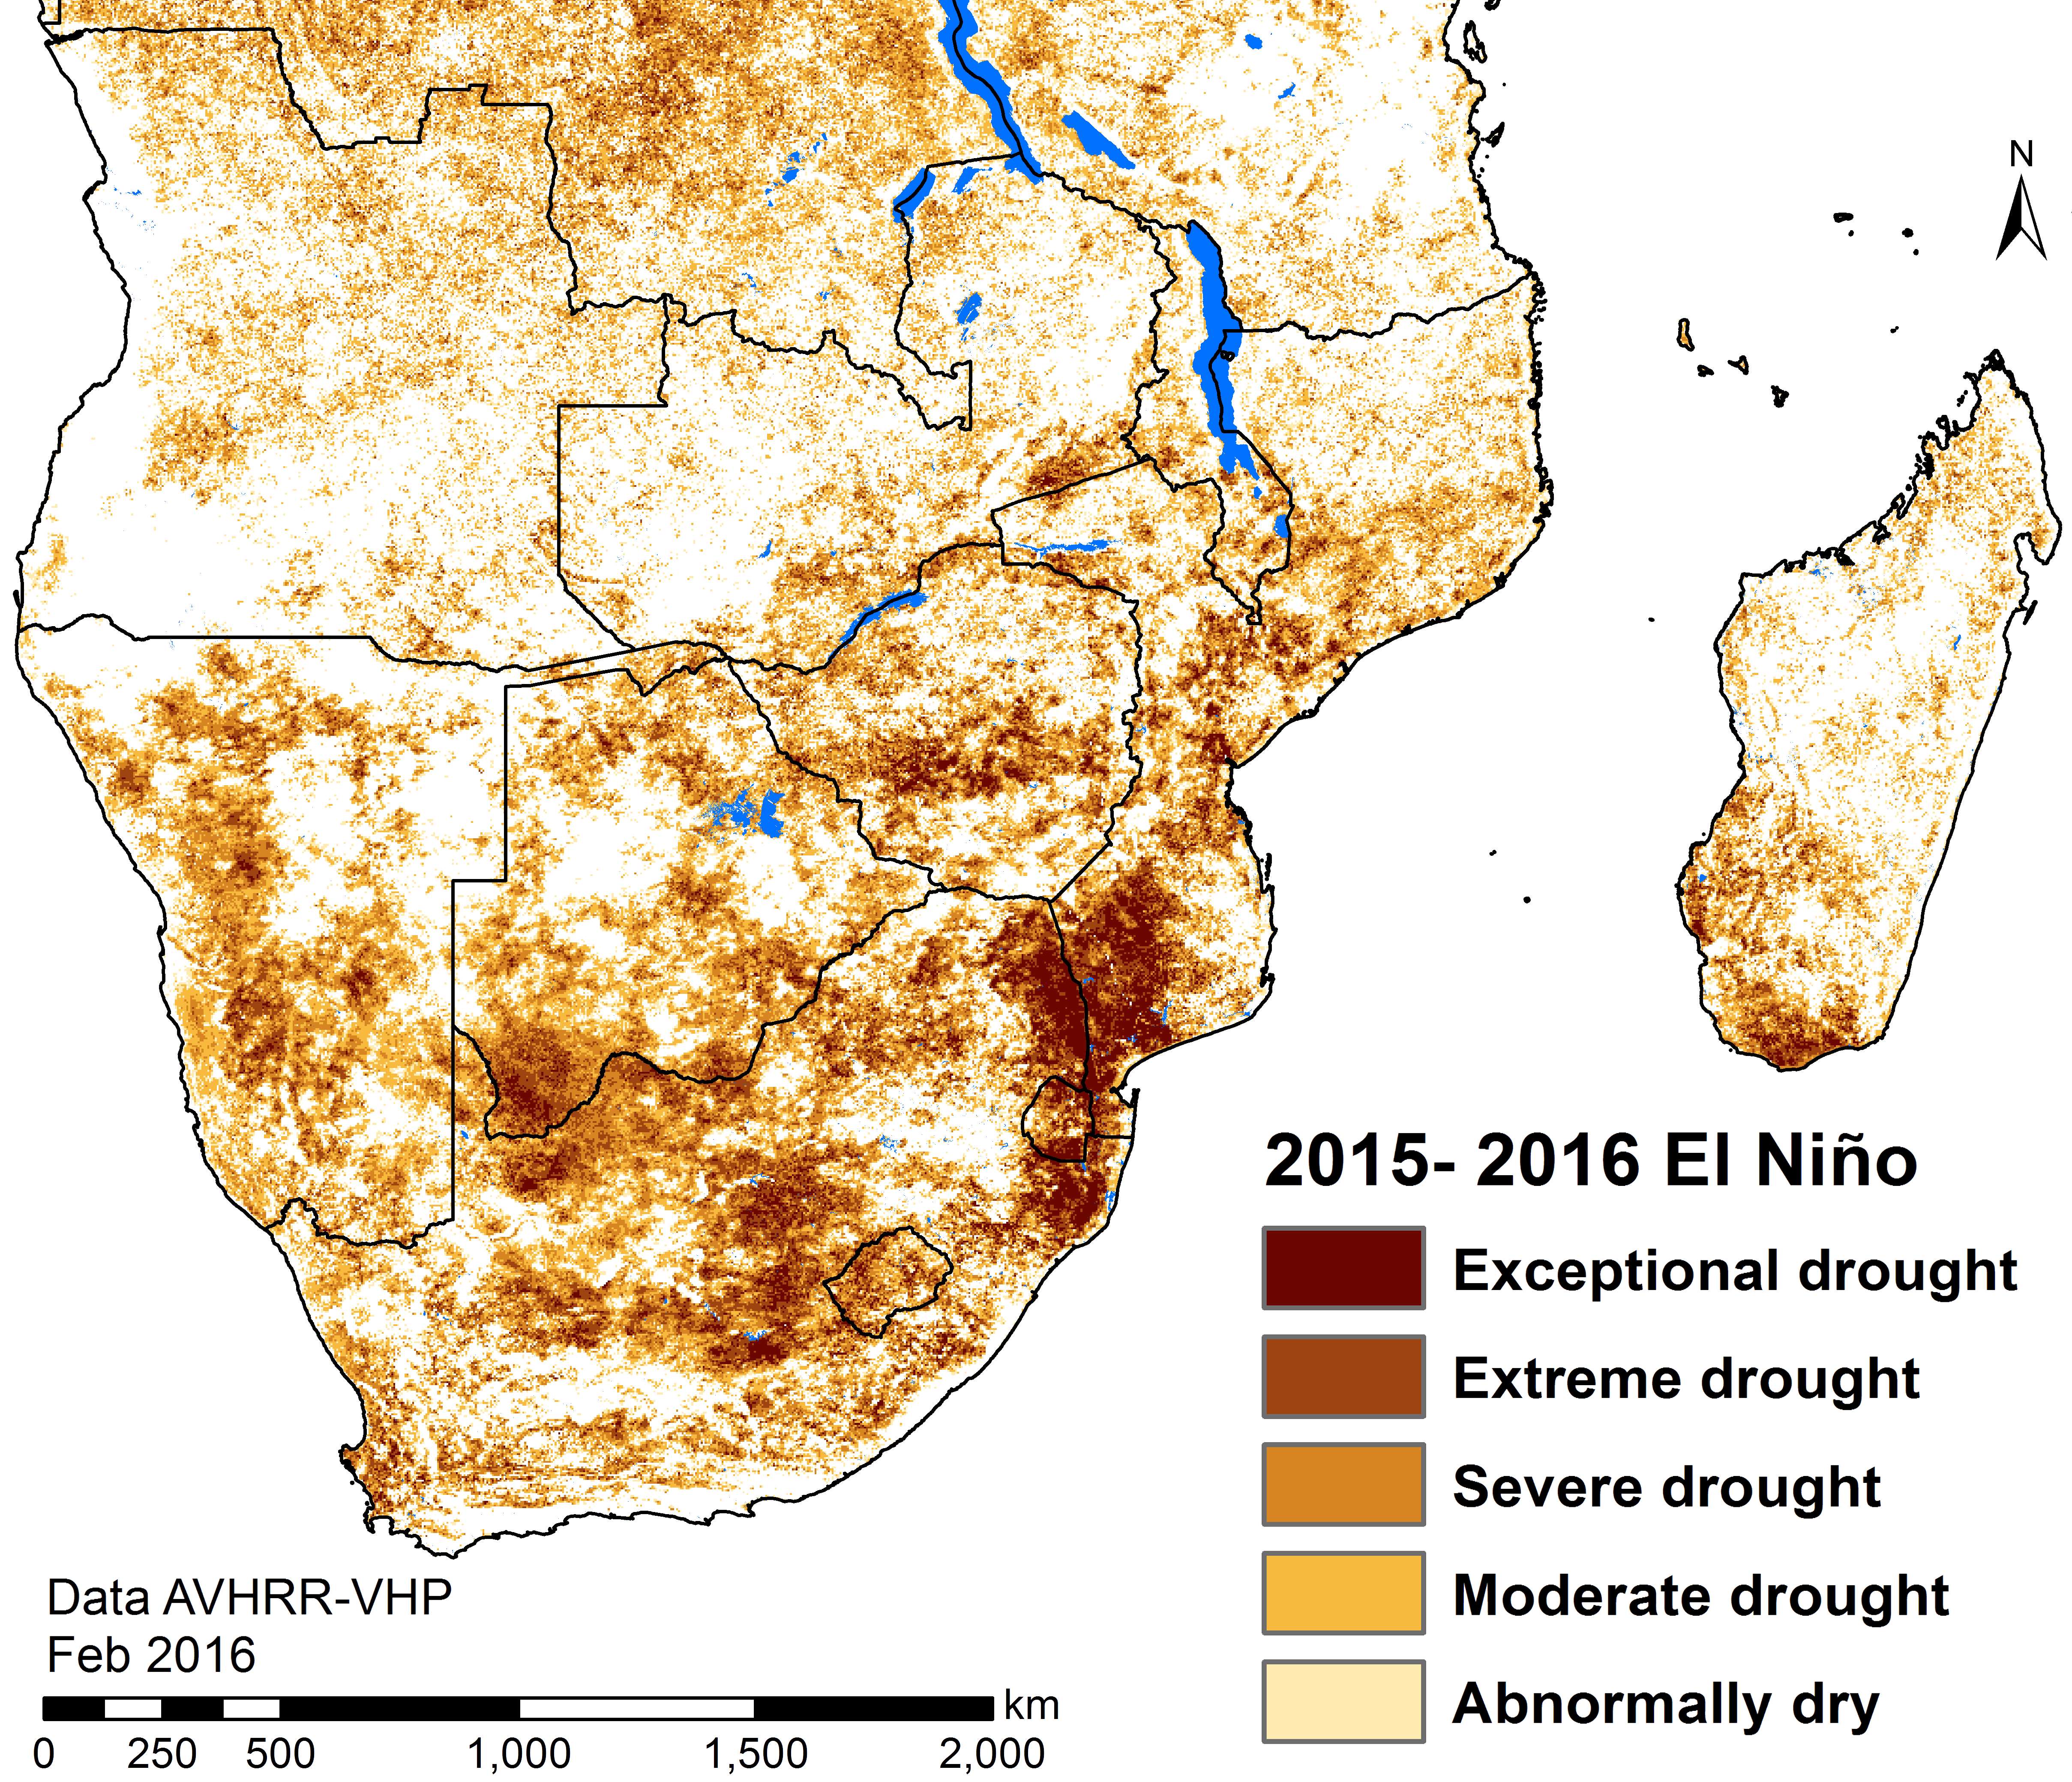 Target for 10 million more climatesmart farmers in southern Africa amid rising cost of El Niño